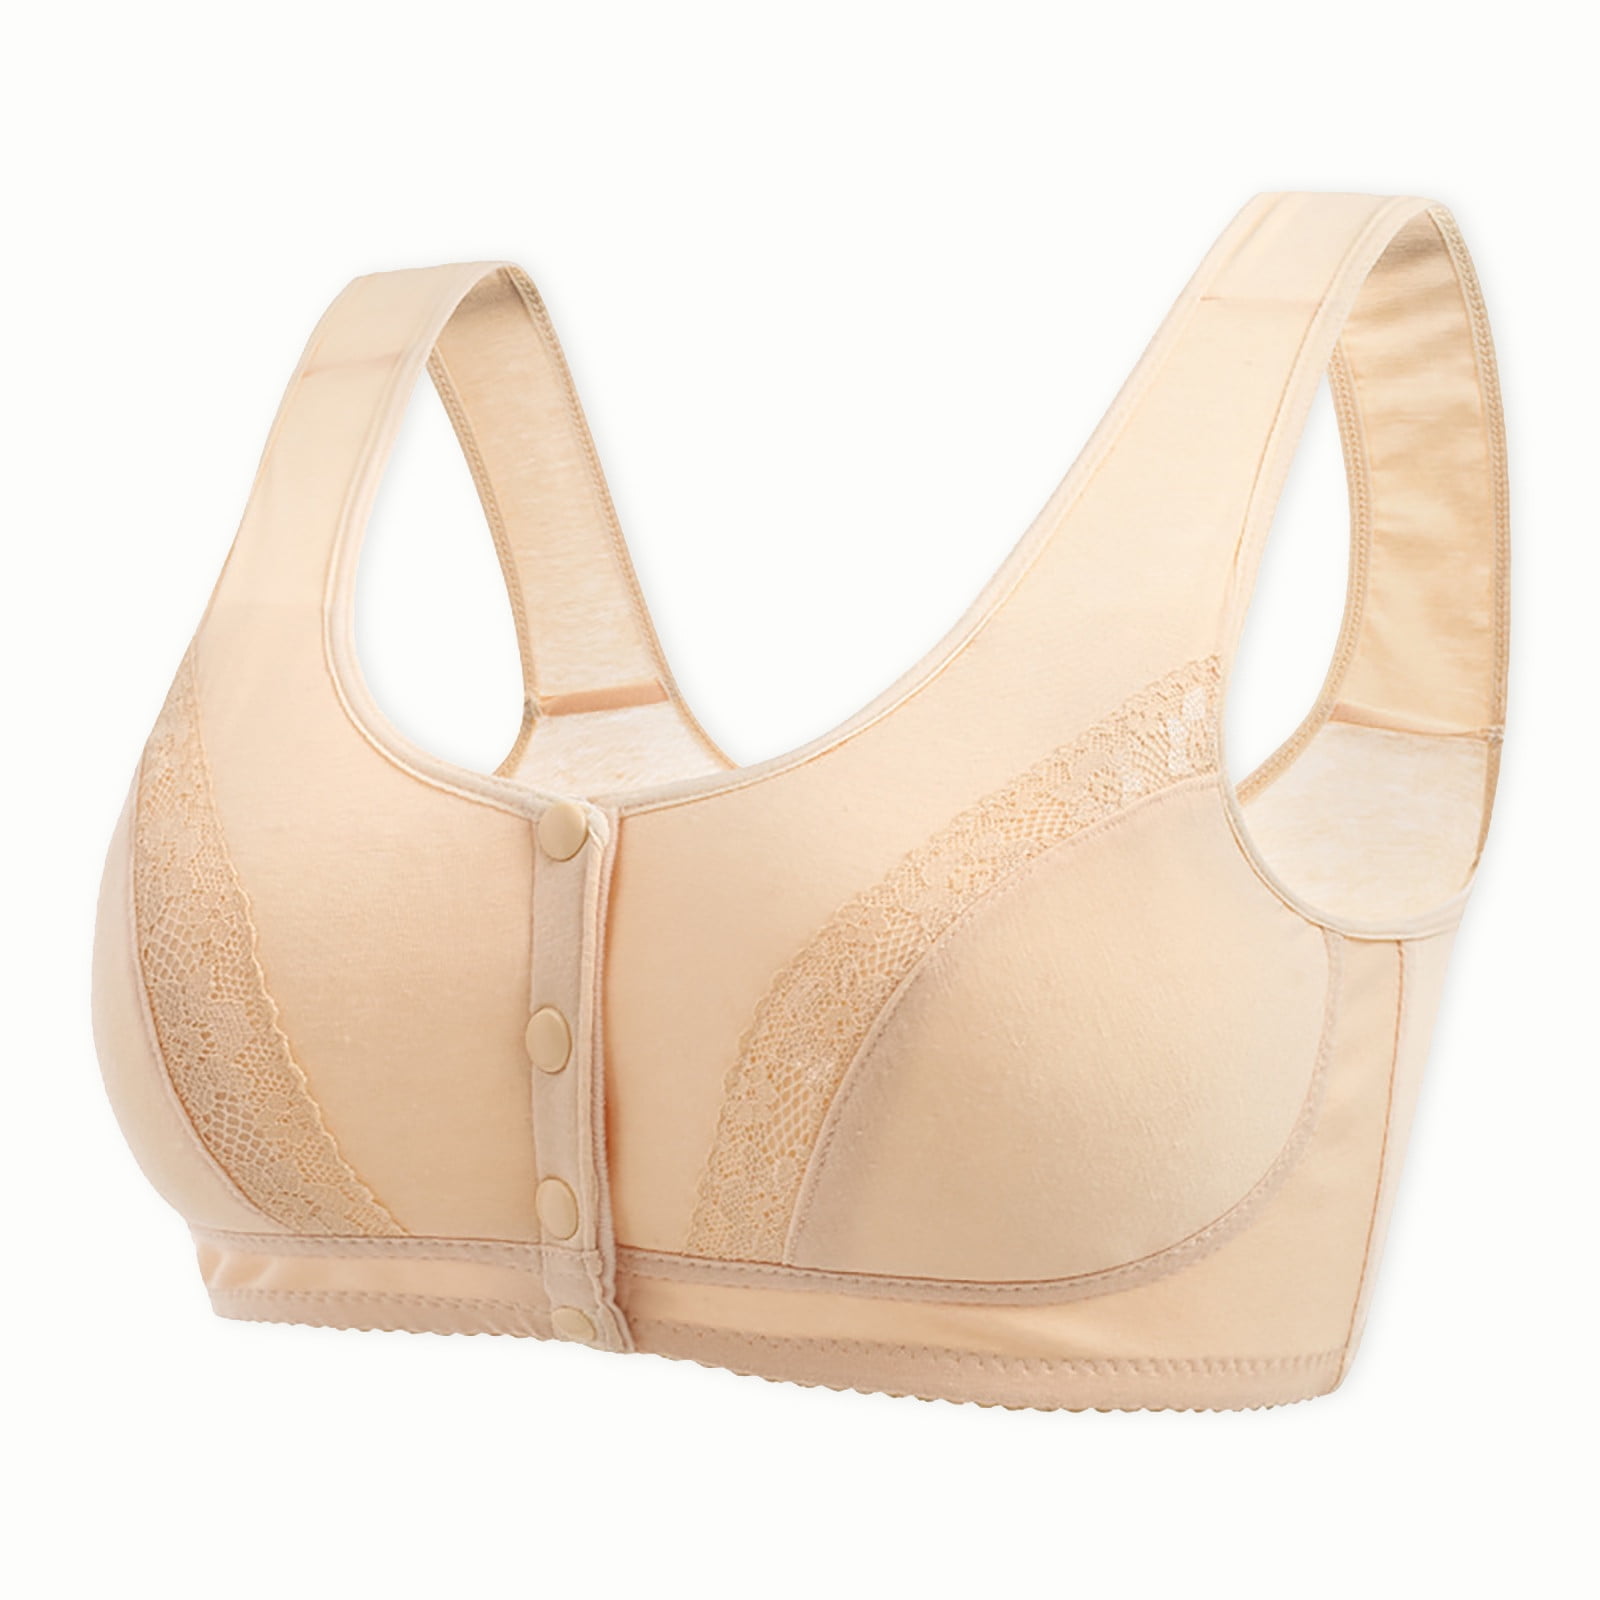 Mother's Day Gifts Tawop Women'S Side Breast Collection, Front